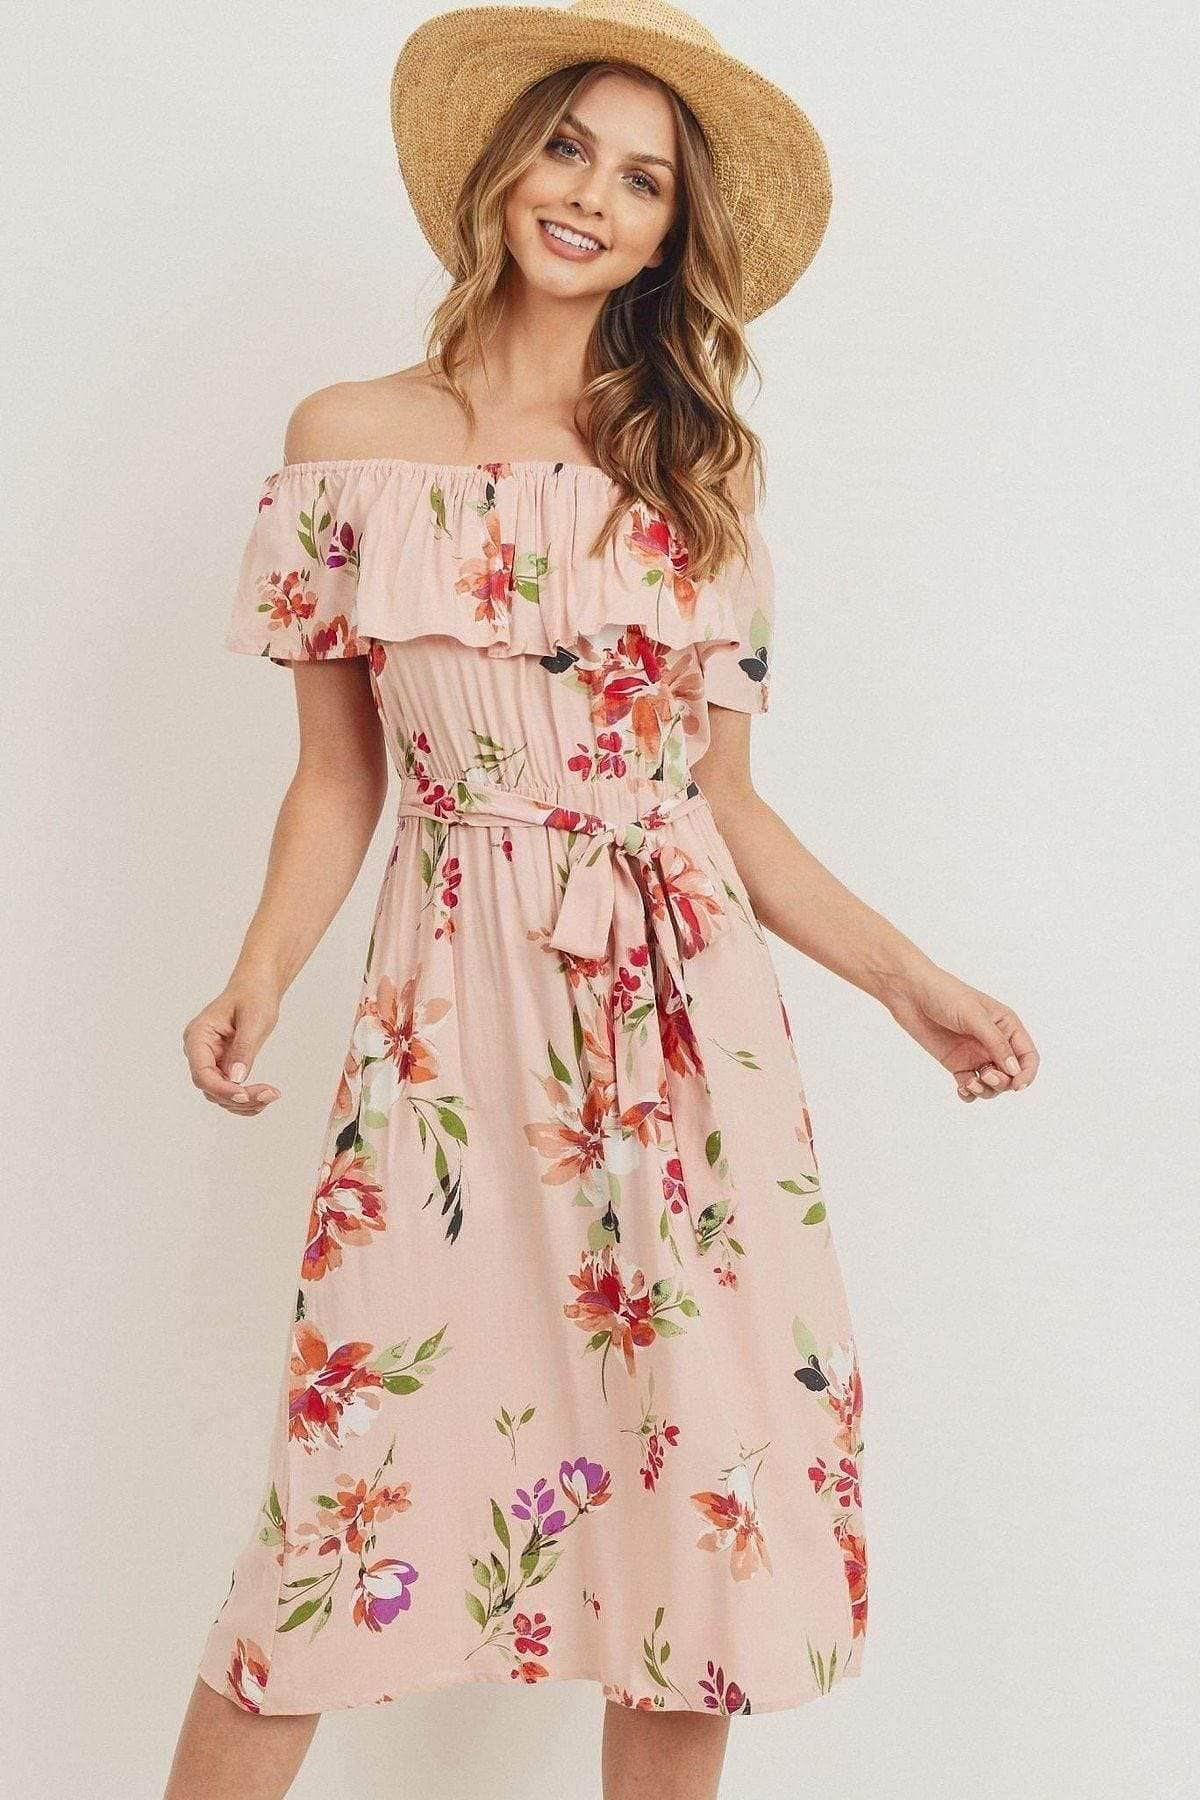 Cream Off The Shoulder Floral Dress - Shopping Therapy, LLC Dress